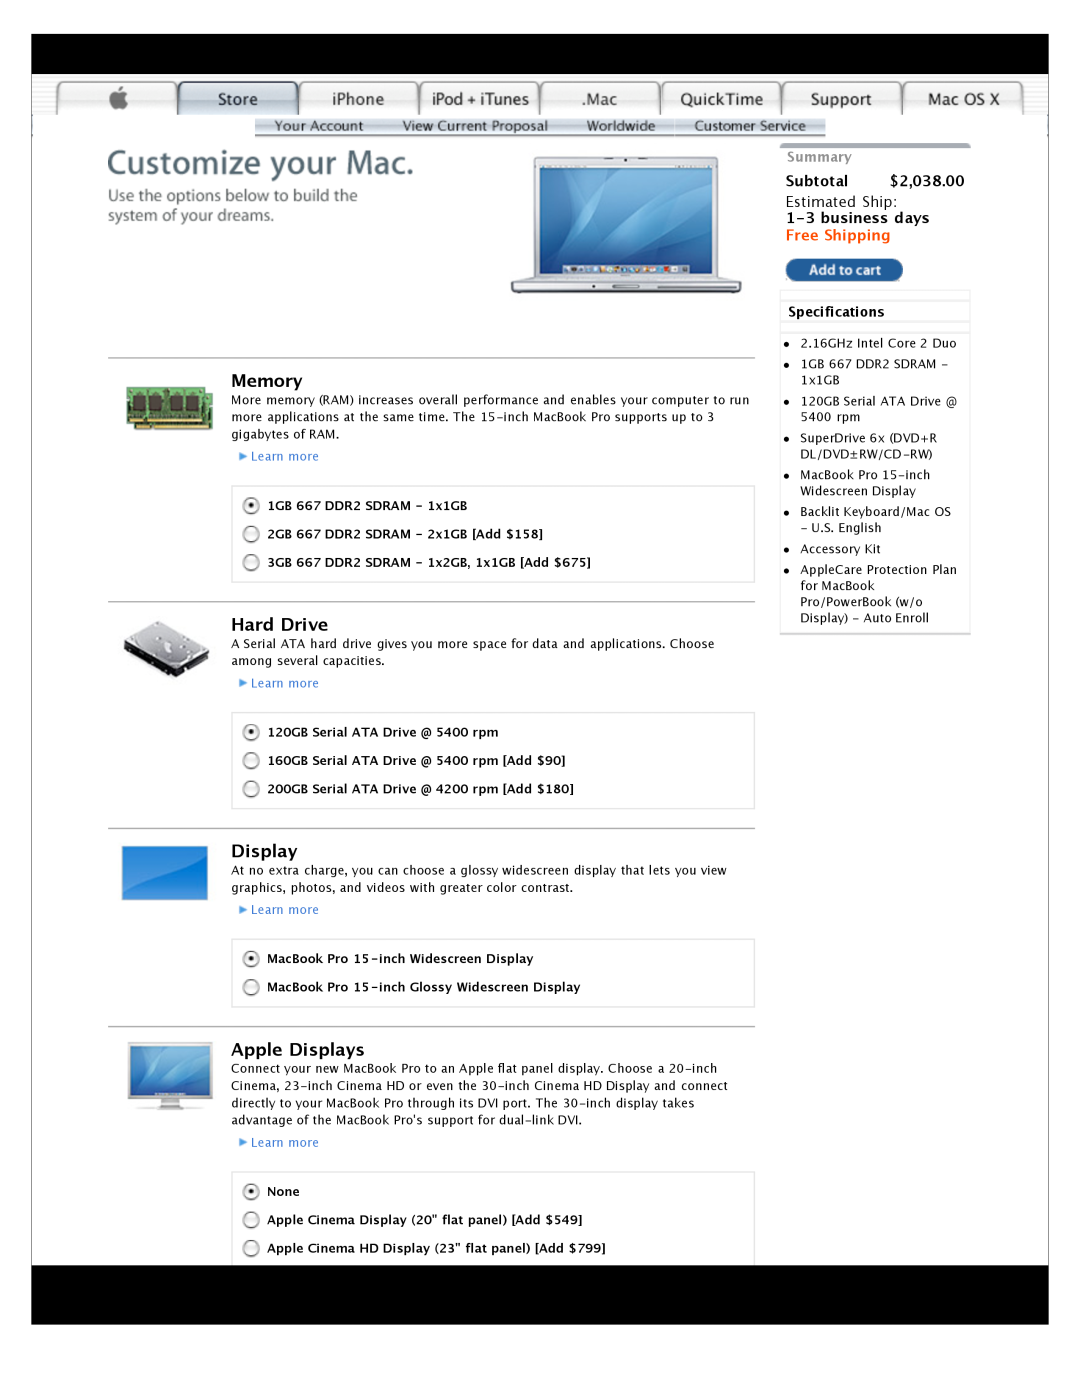 Apple Mac Computer specifications Memory, Hard Drive, Apple Displays, Learn more, Subtotal $2,038.00, Estimated Ship 